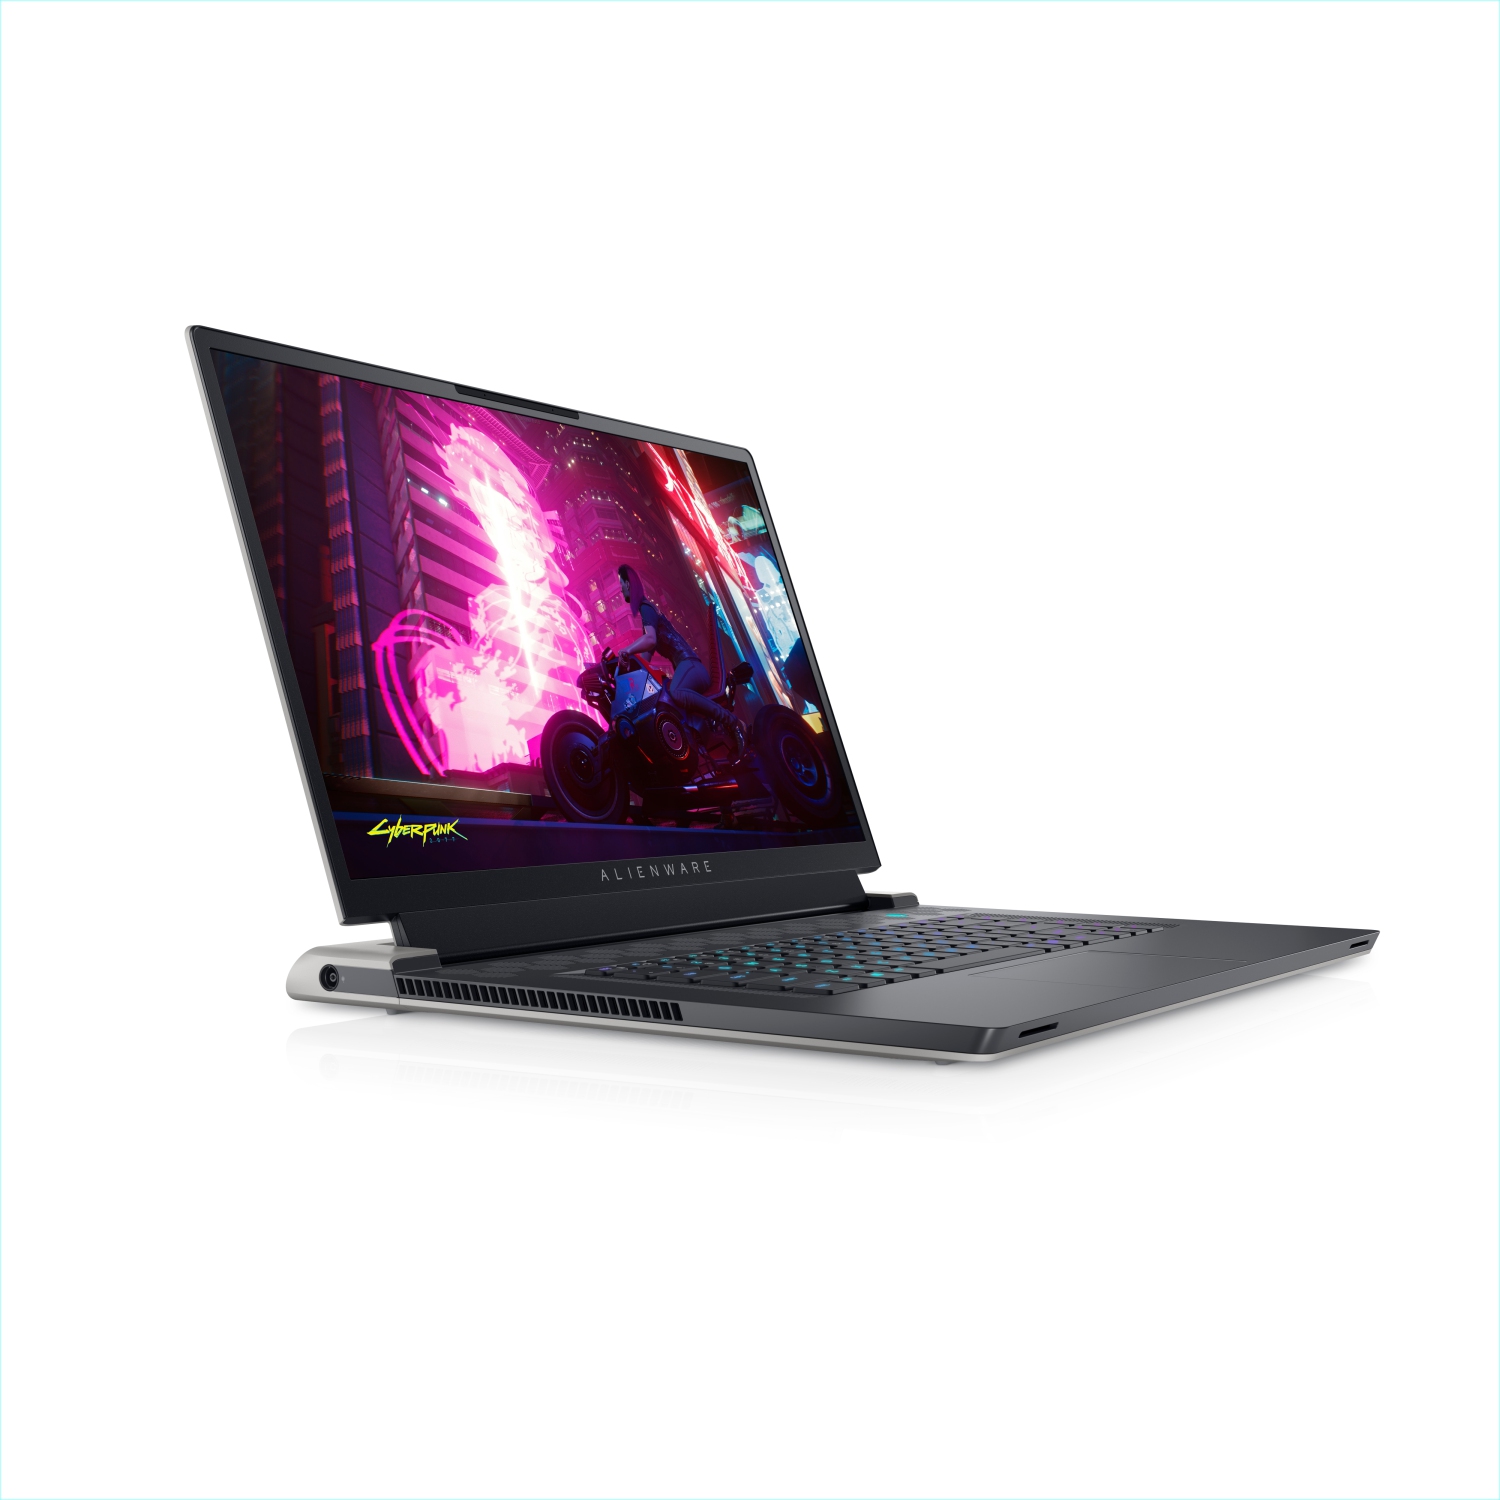 Refurbished (Excellent) – Alienware X17 R1 Gaming Laptop | 17.3" | Core i7 - - 64GB RAM - RTX 3080 | 8 Cores @ 4.6 GHz